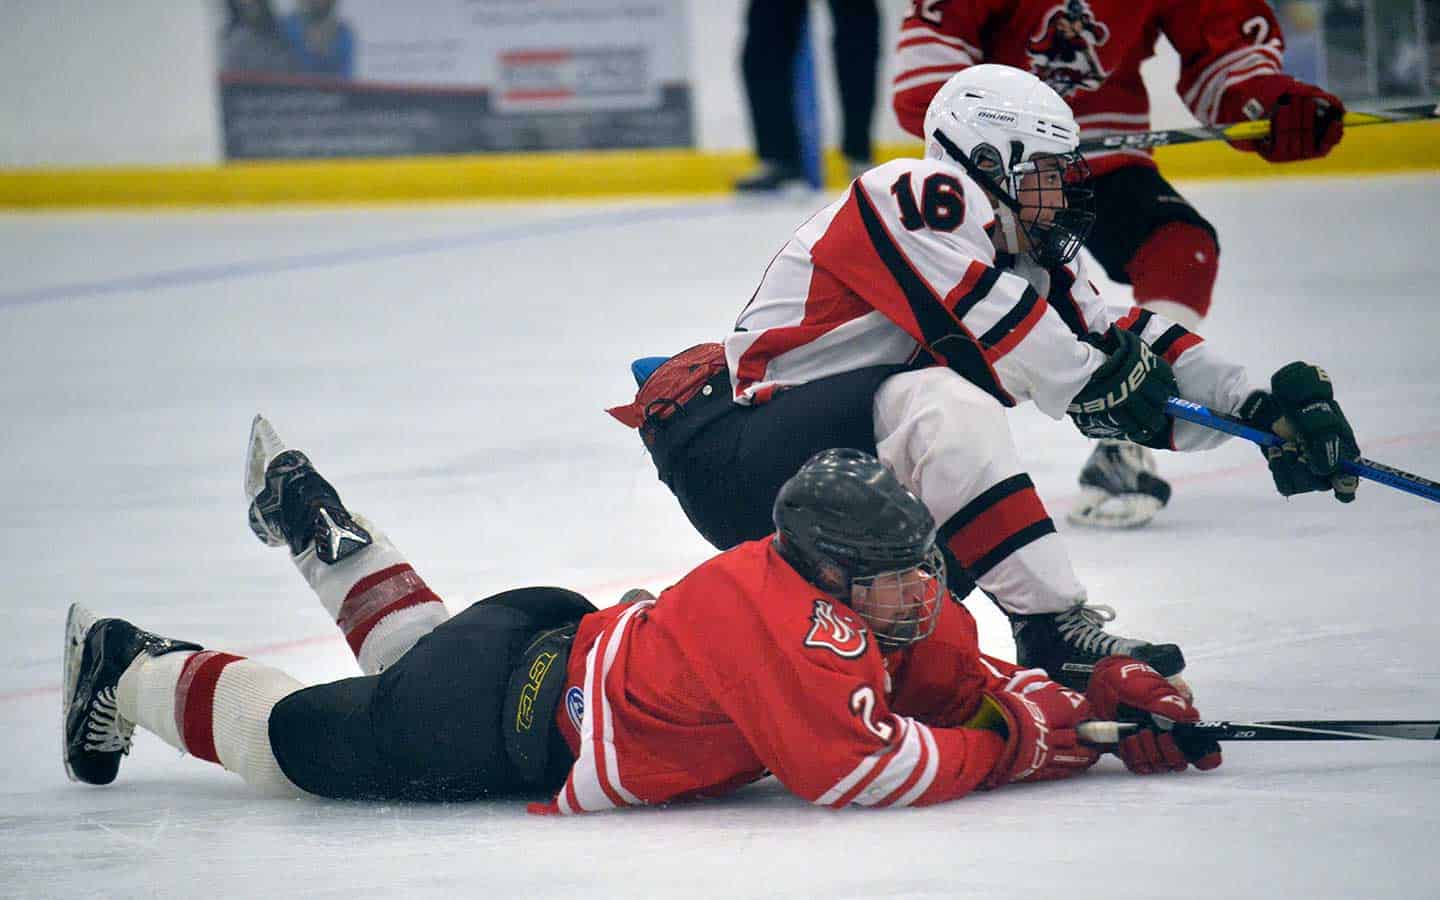 Widespread cancellations put an end to playoff runs of Sugar Kings, Applejacks